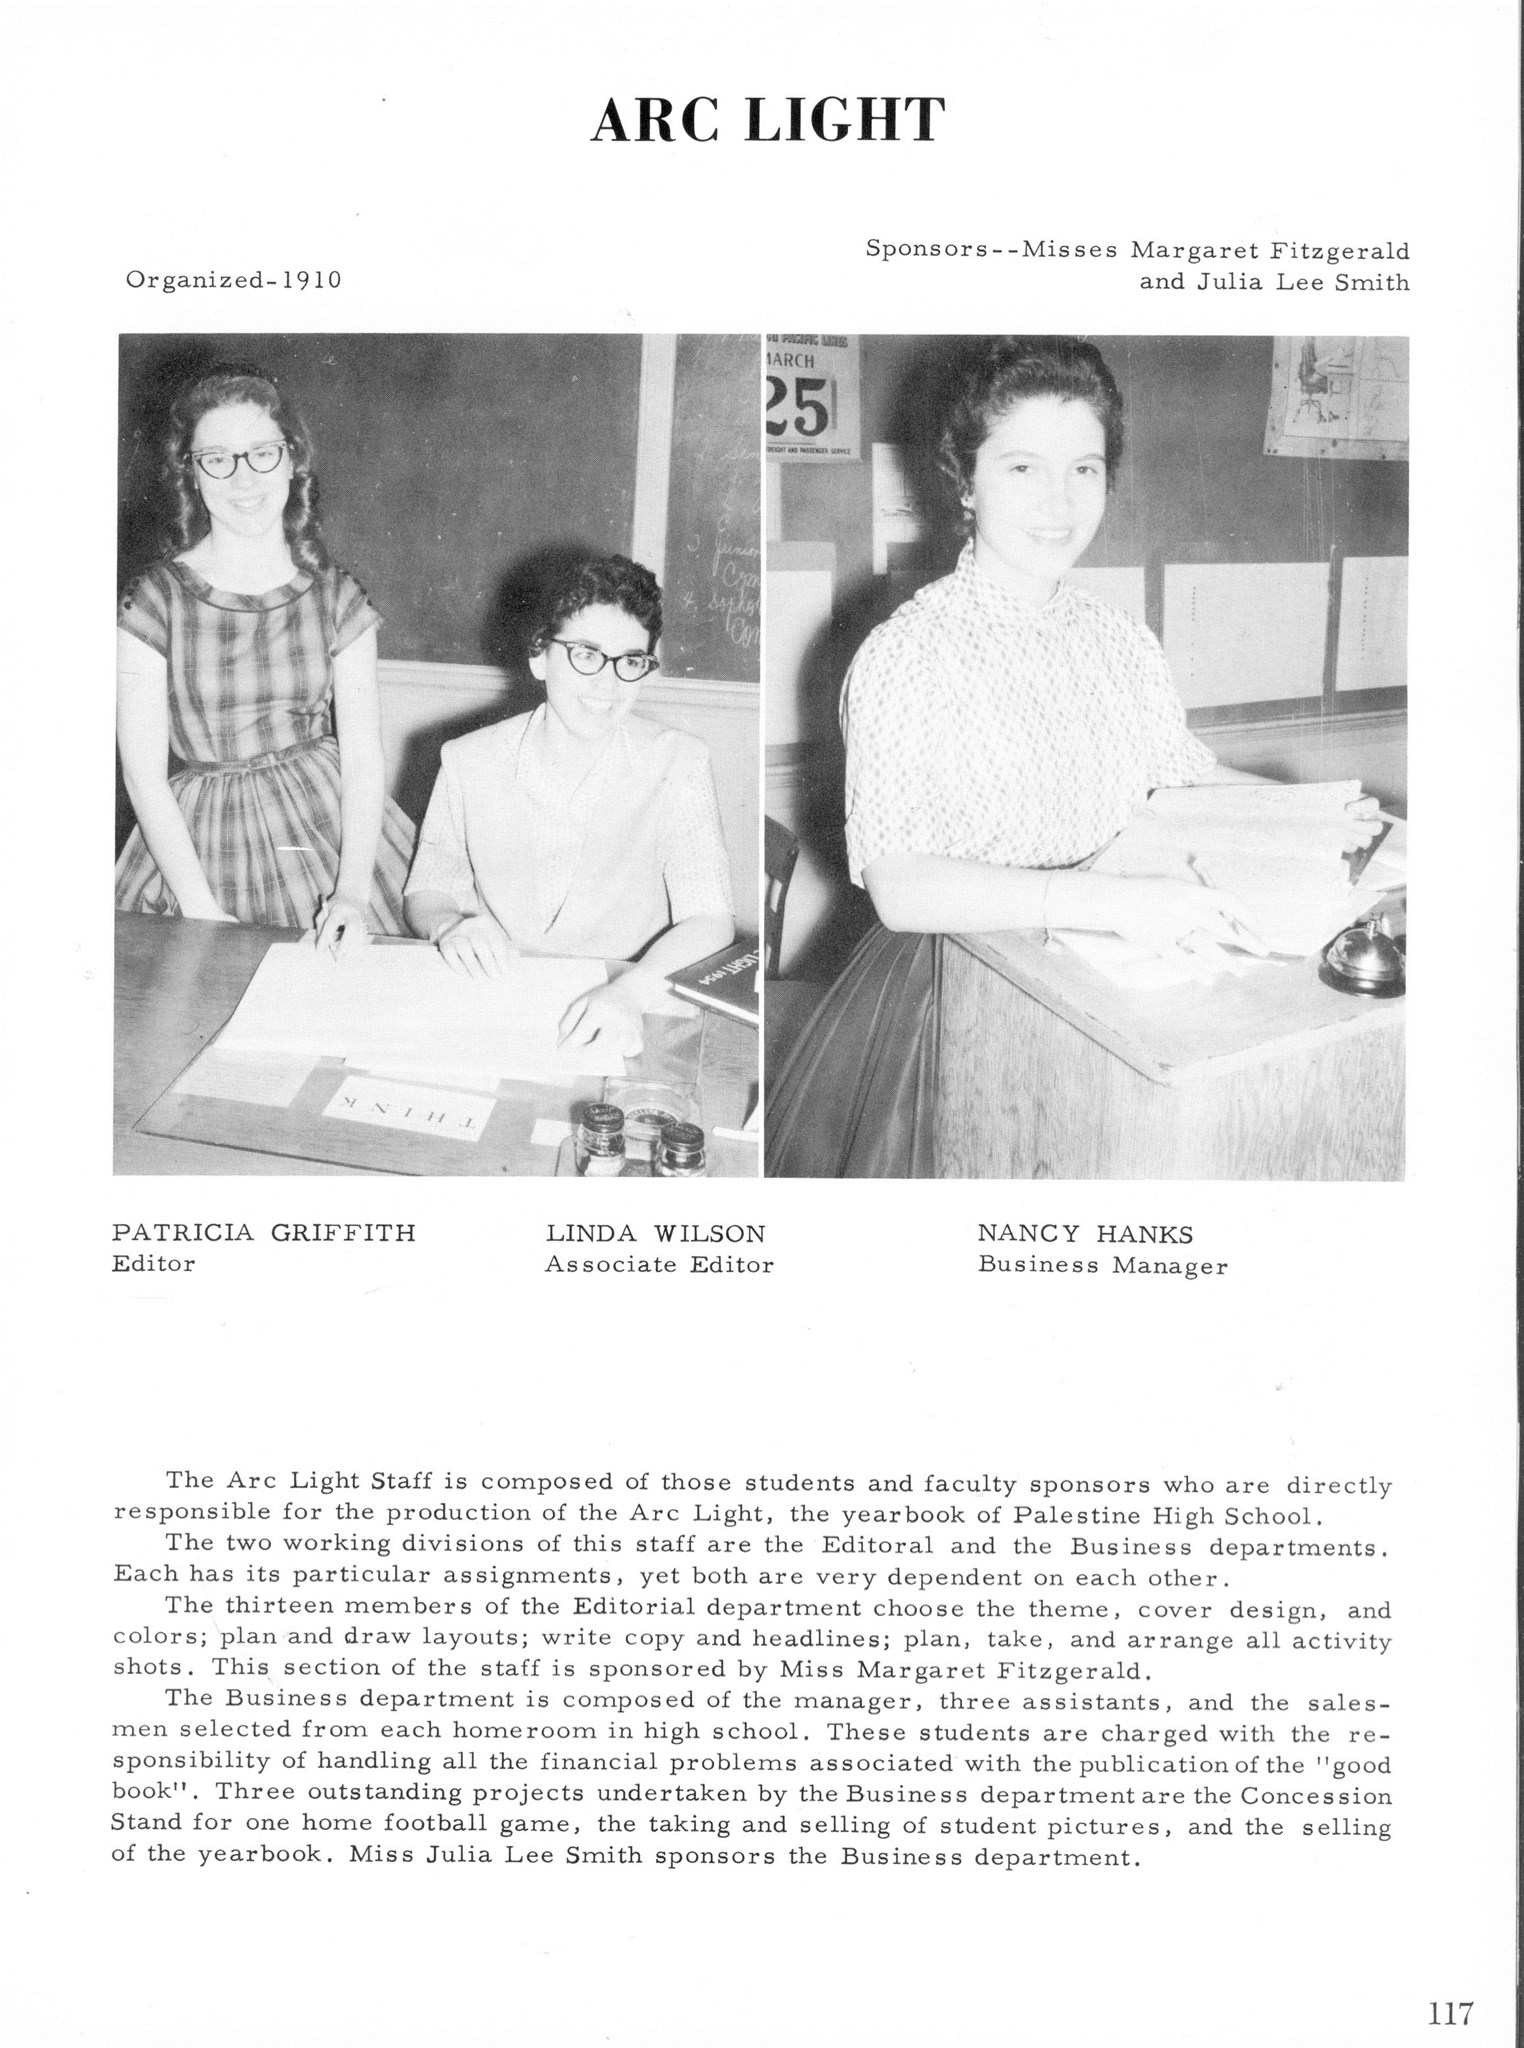 ../../../Images/Large/1959/Arclight-1959-pg0117.jpg